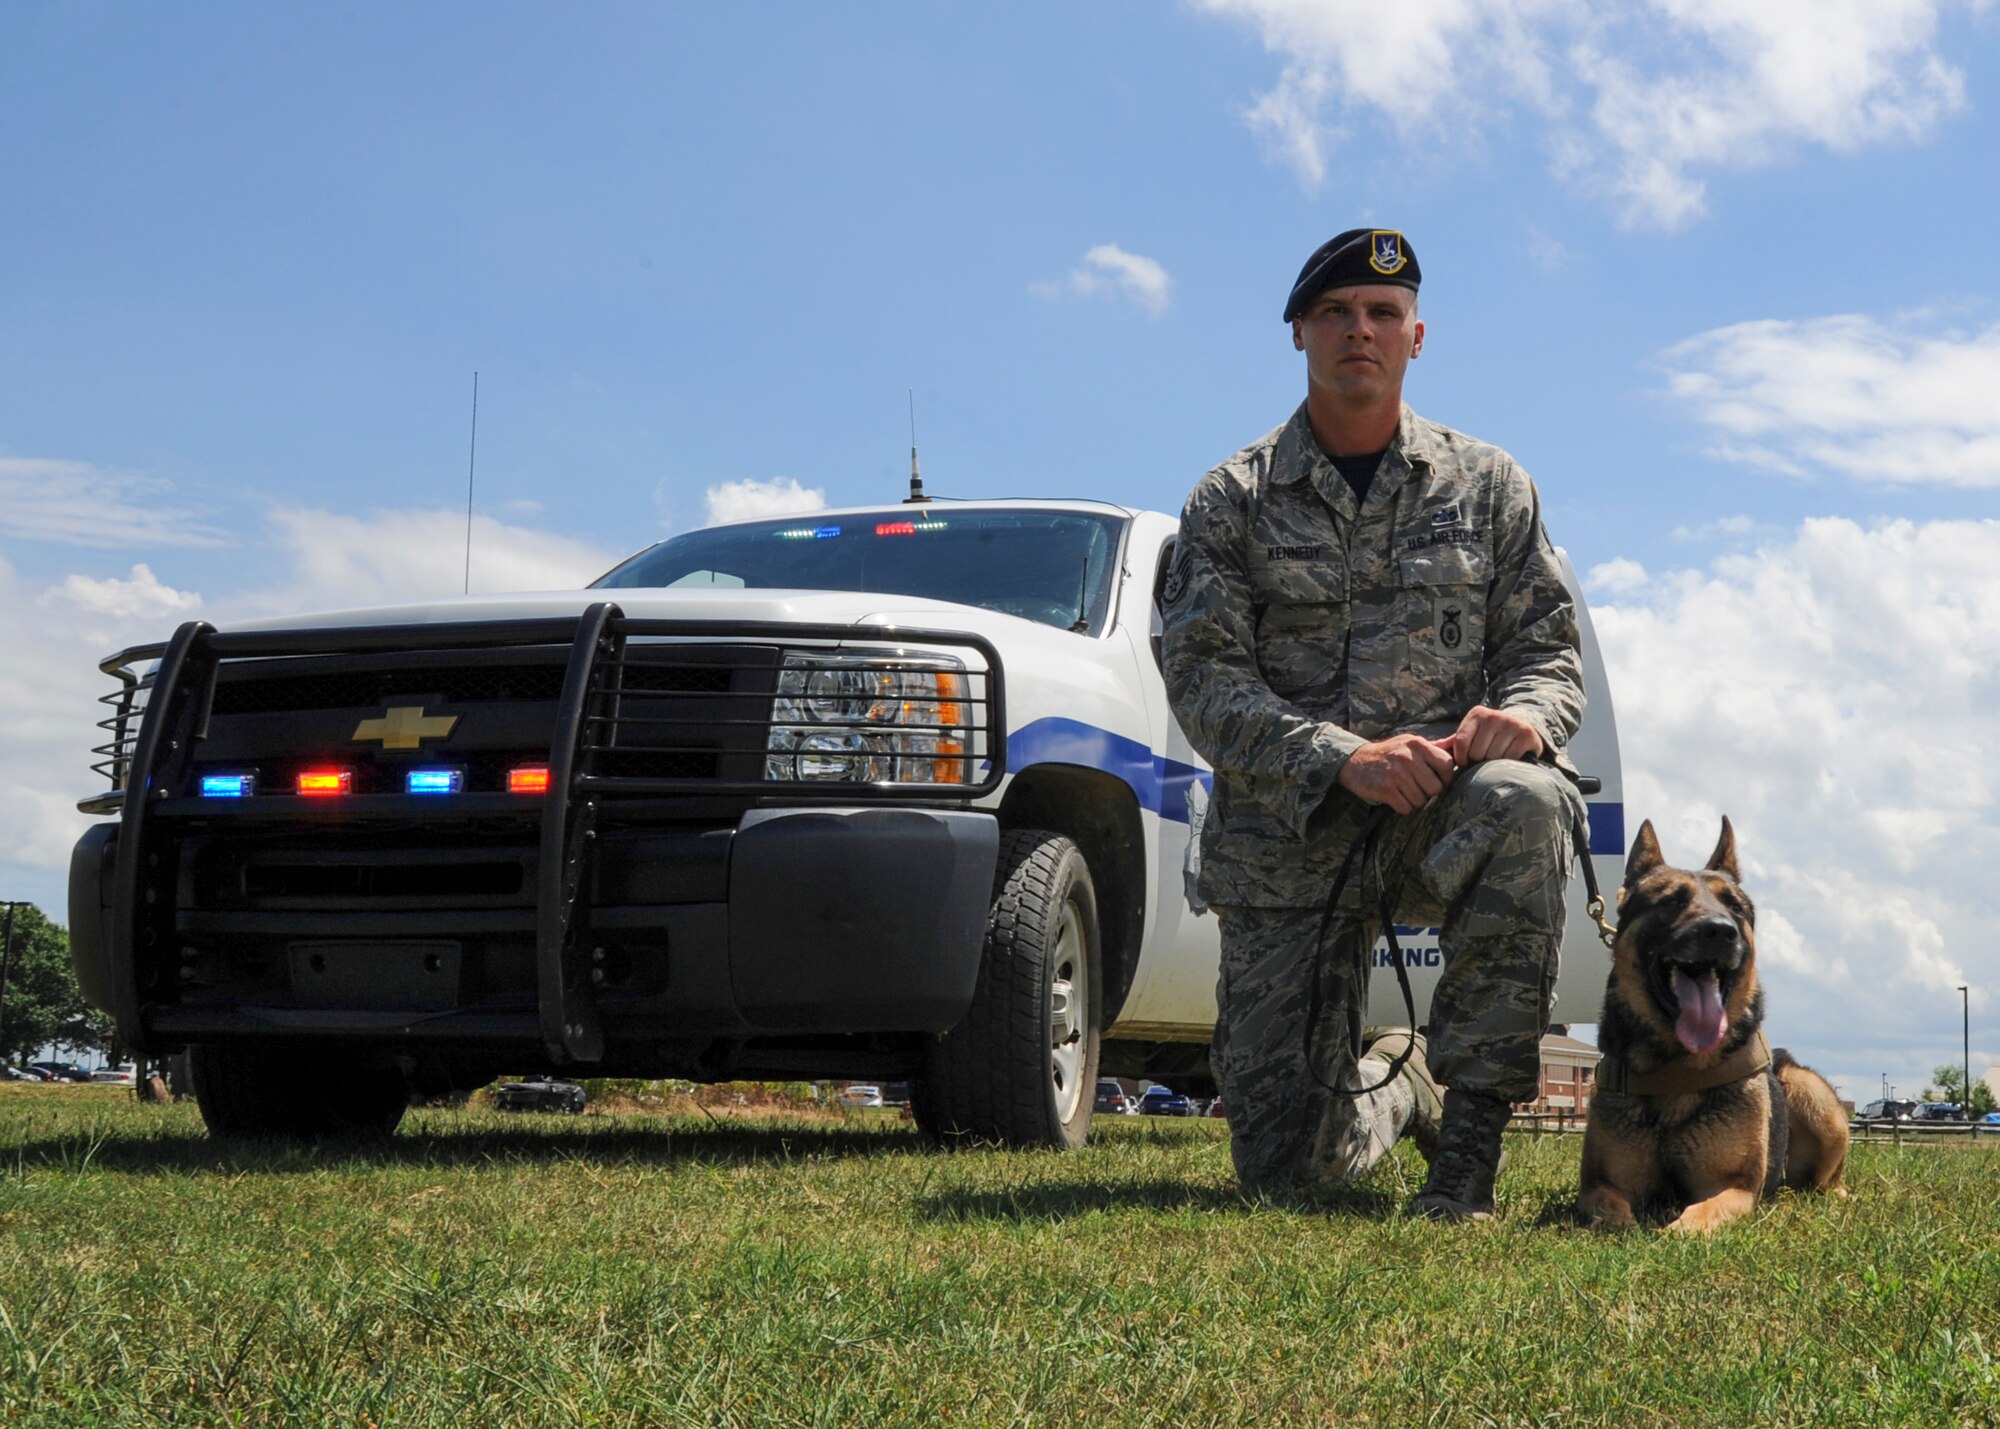 U.S. Air Force Staff Sgt. Jeffrie Kennedy, 633rd Security Forces Squadron military working dog handler, and his partner, Toni, 633rd SFS MWD, pose for a photo at Joint Base Langley-Eustis, Va., Aug. 4, 2017.